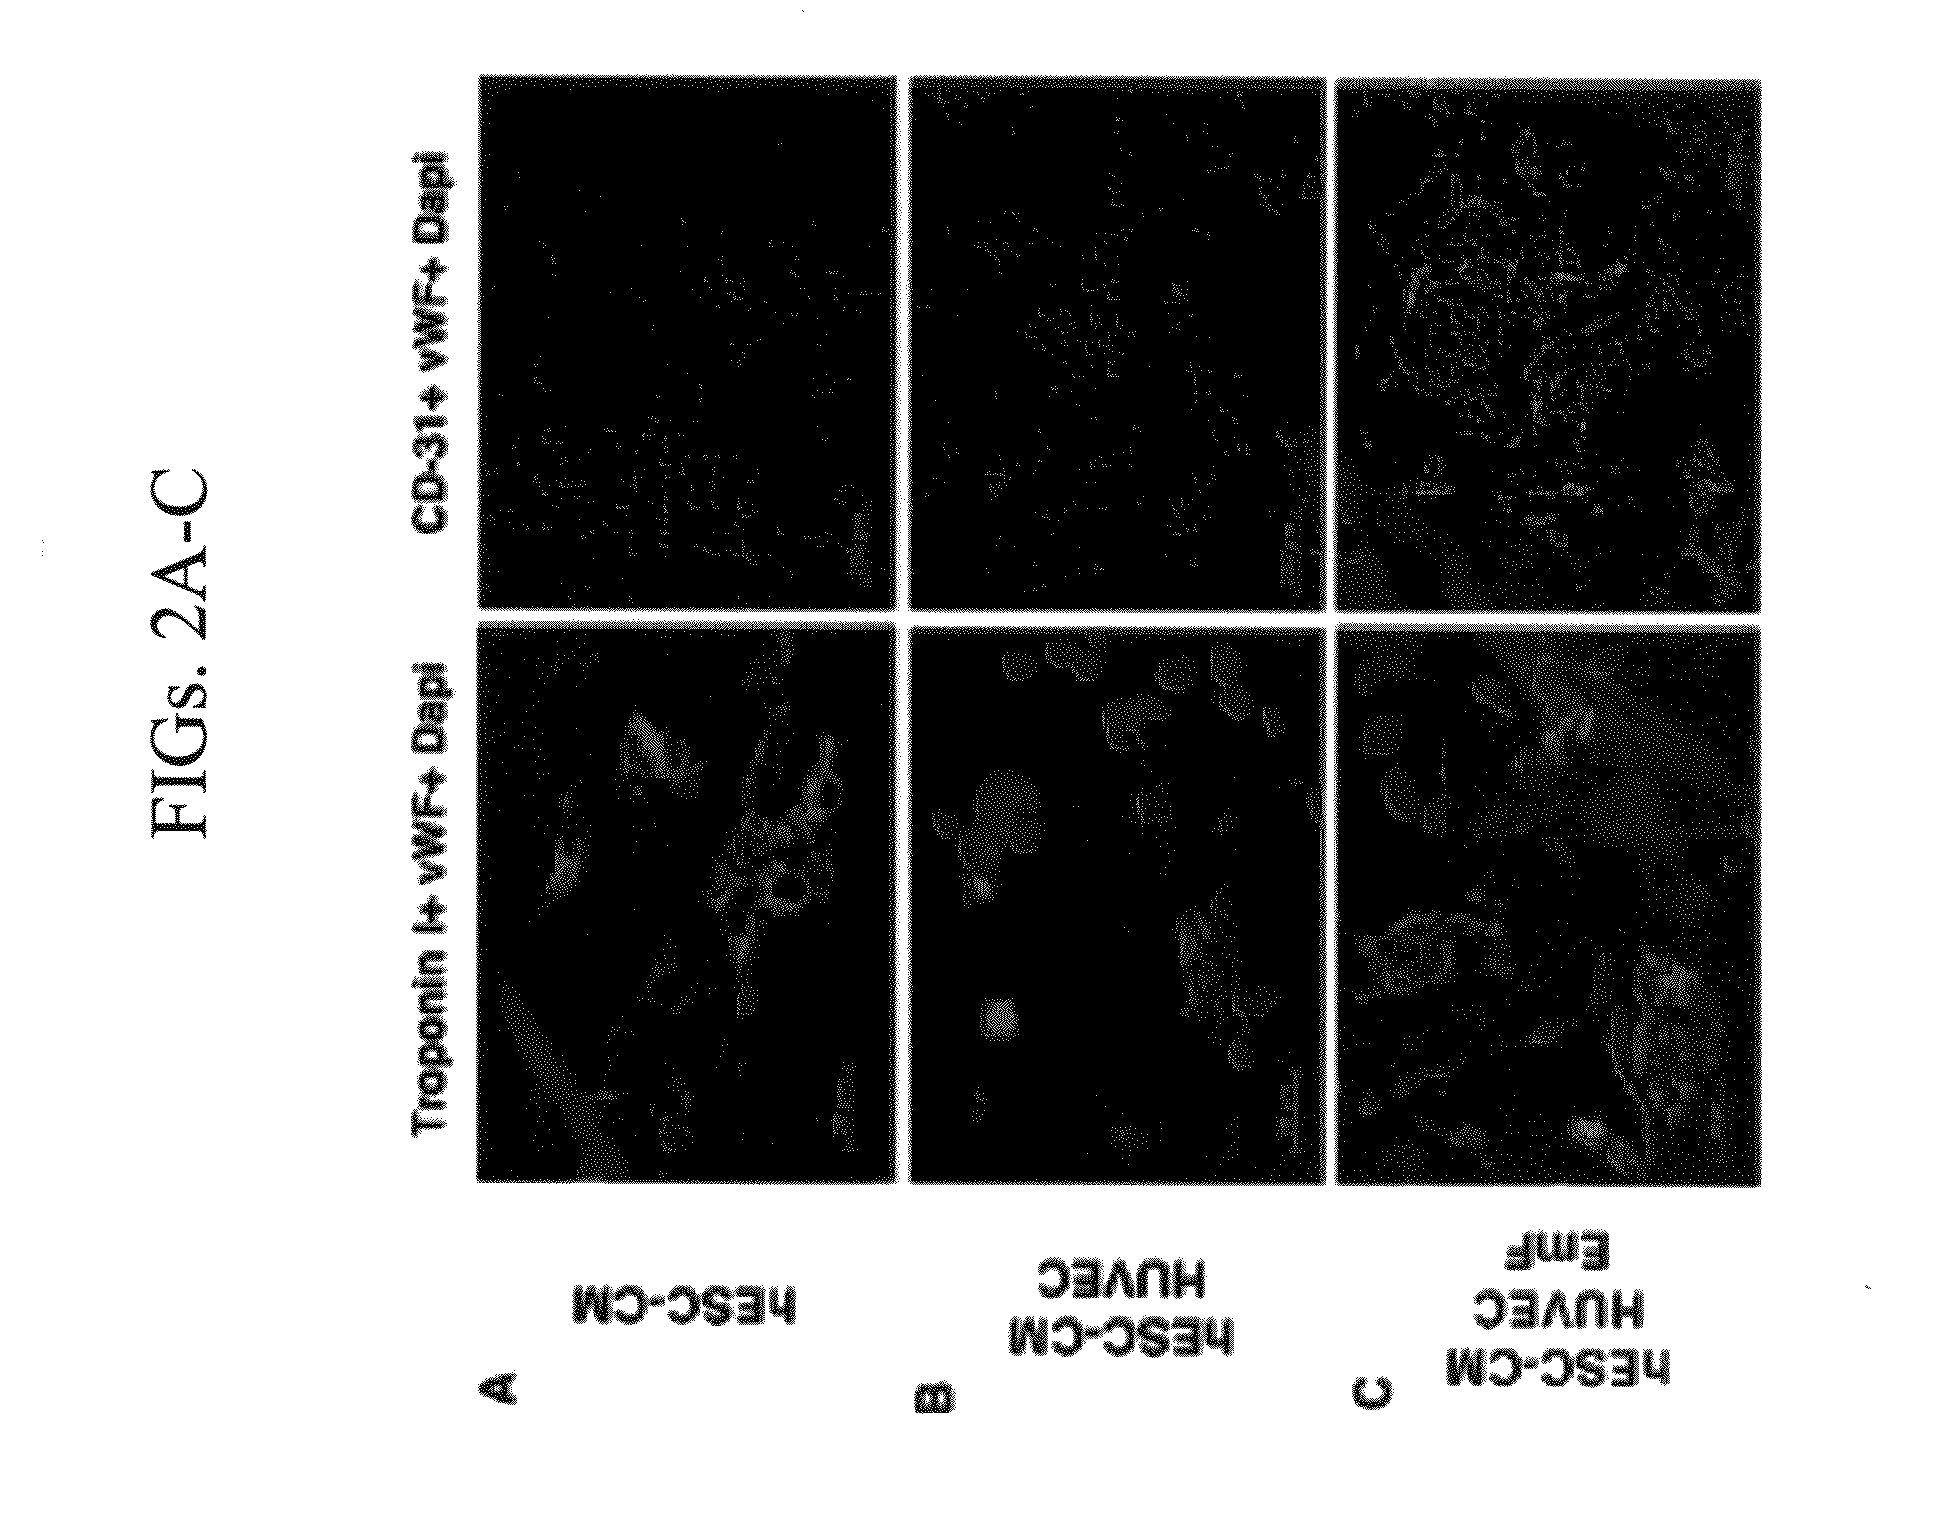 Vascularized cardiac tissue and methods of producing and using same